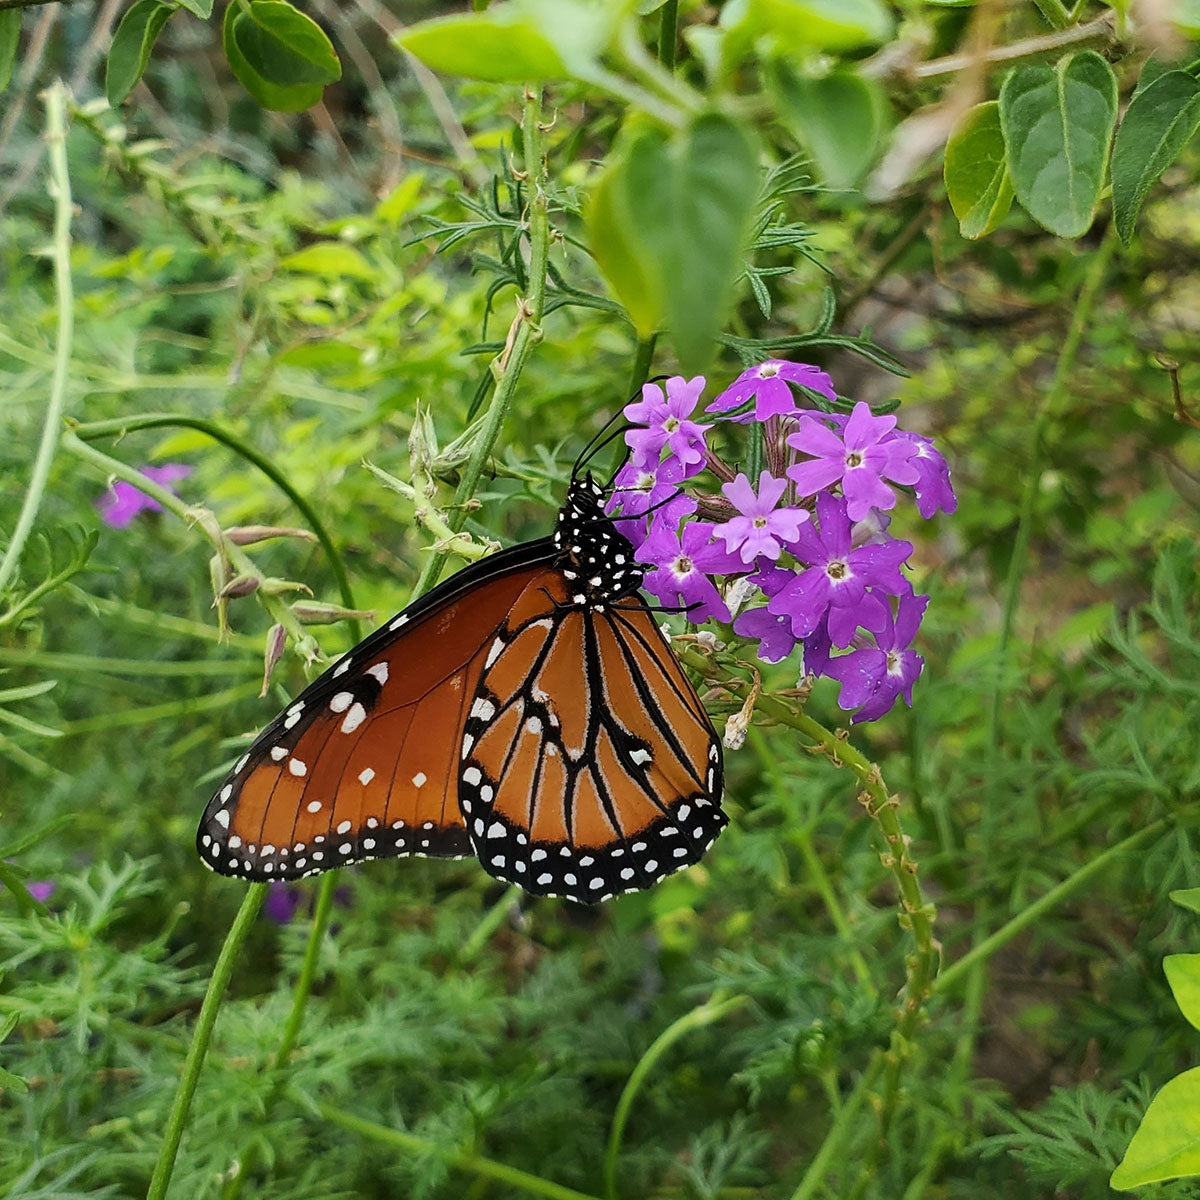 Butterfly garden mix is great for attracting pollinators to your yard and vegetable garden area.